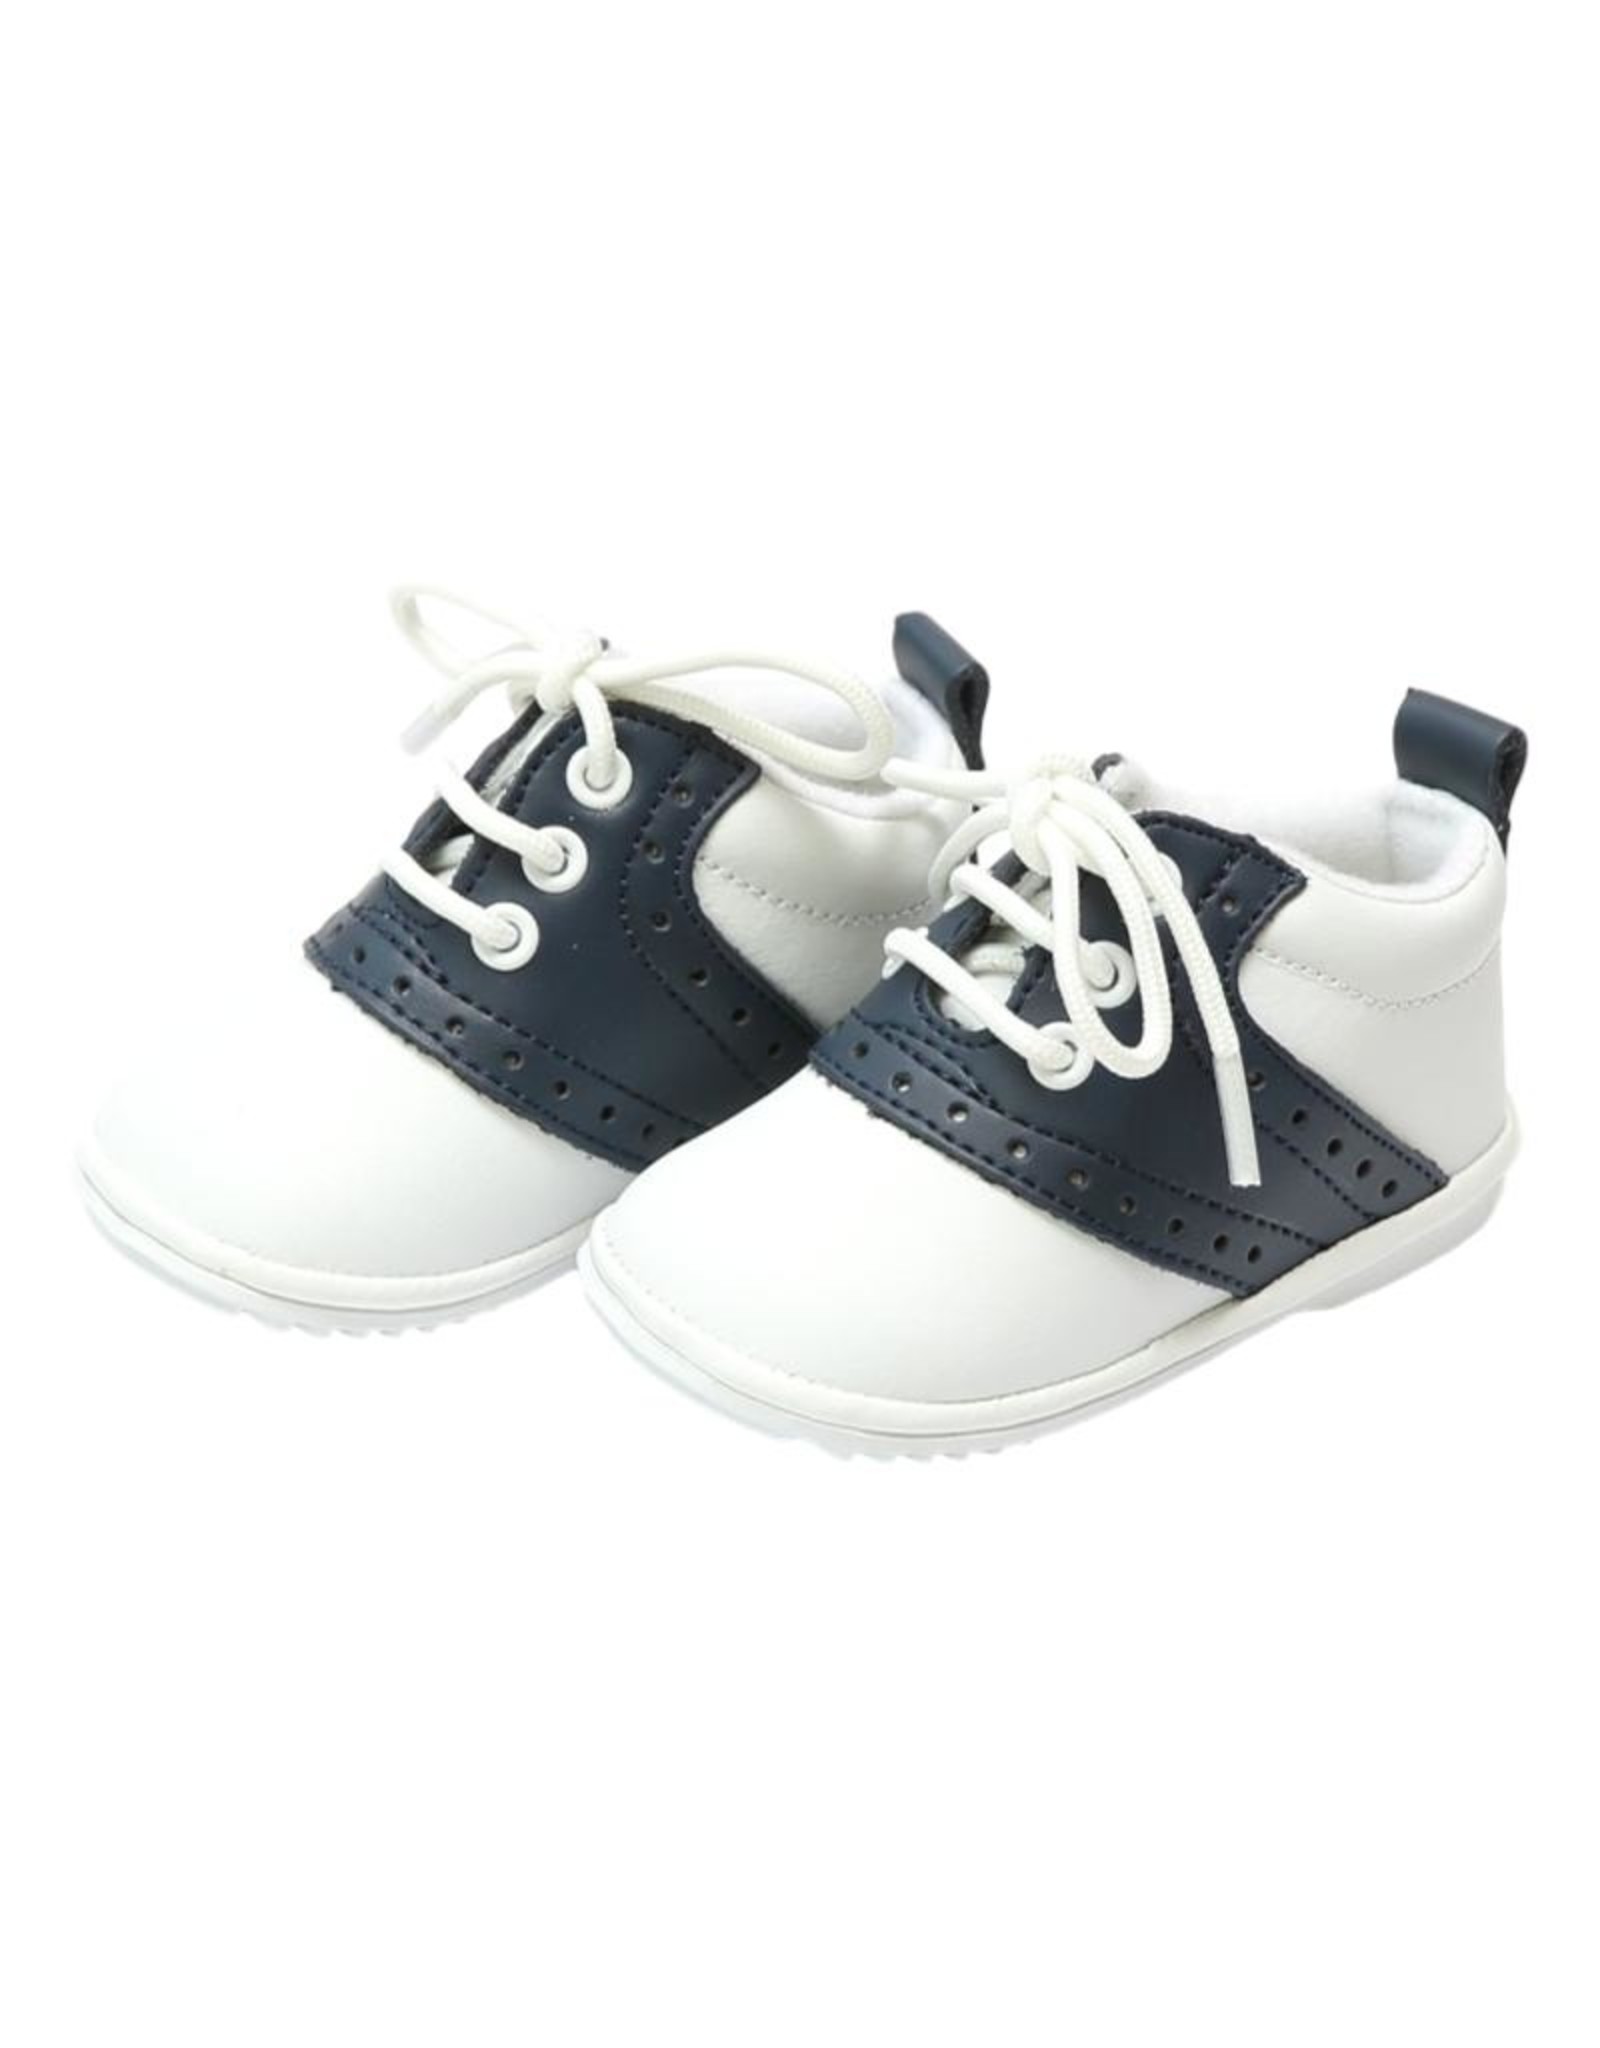 Angel by L'Amour Austin 2342 Oxford Shoe white/navy